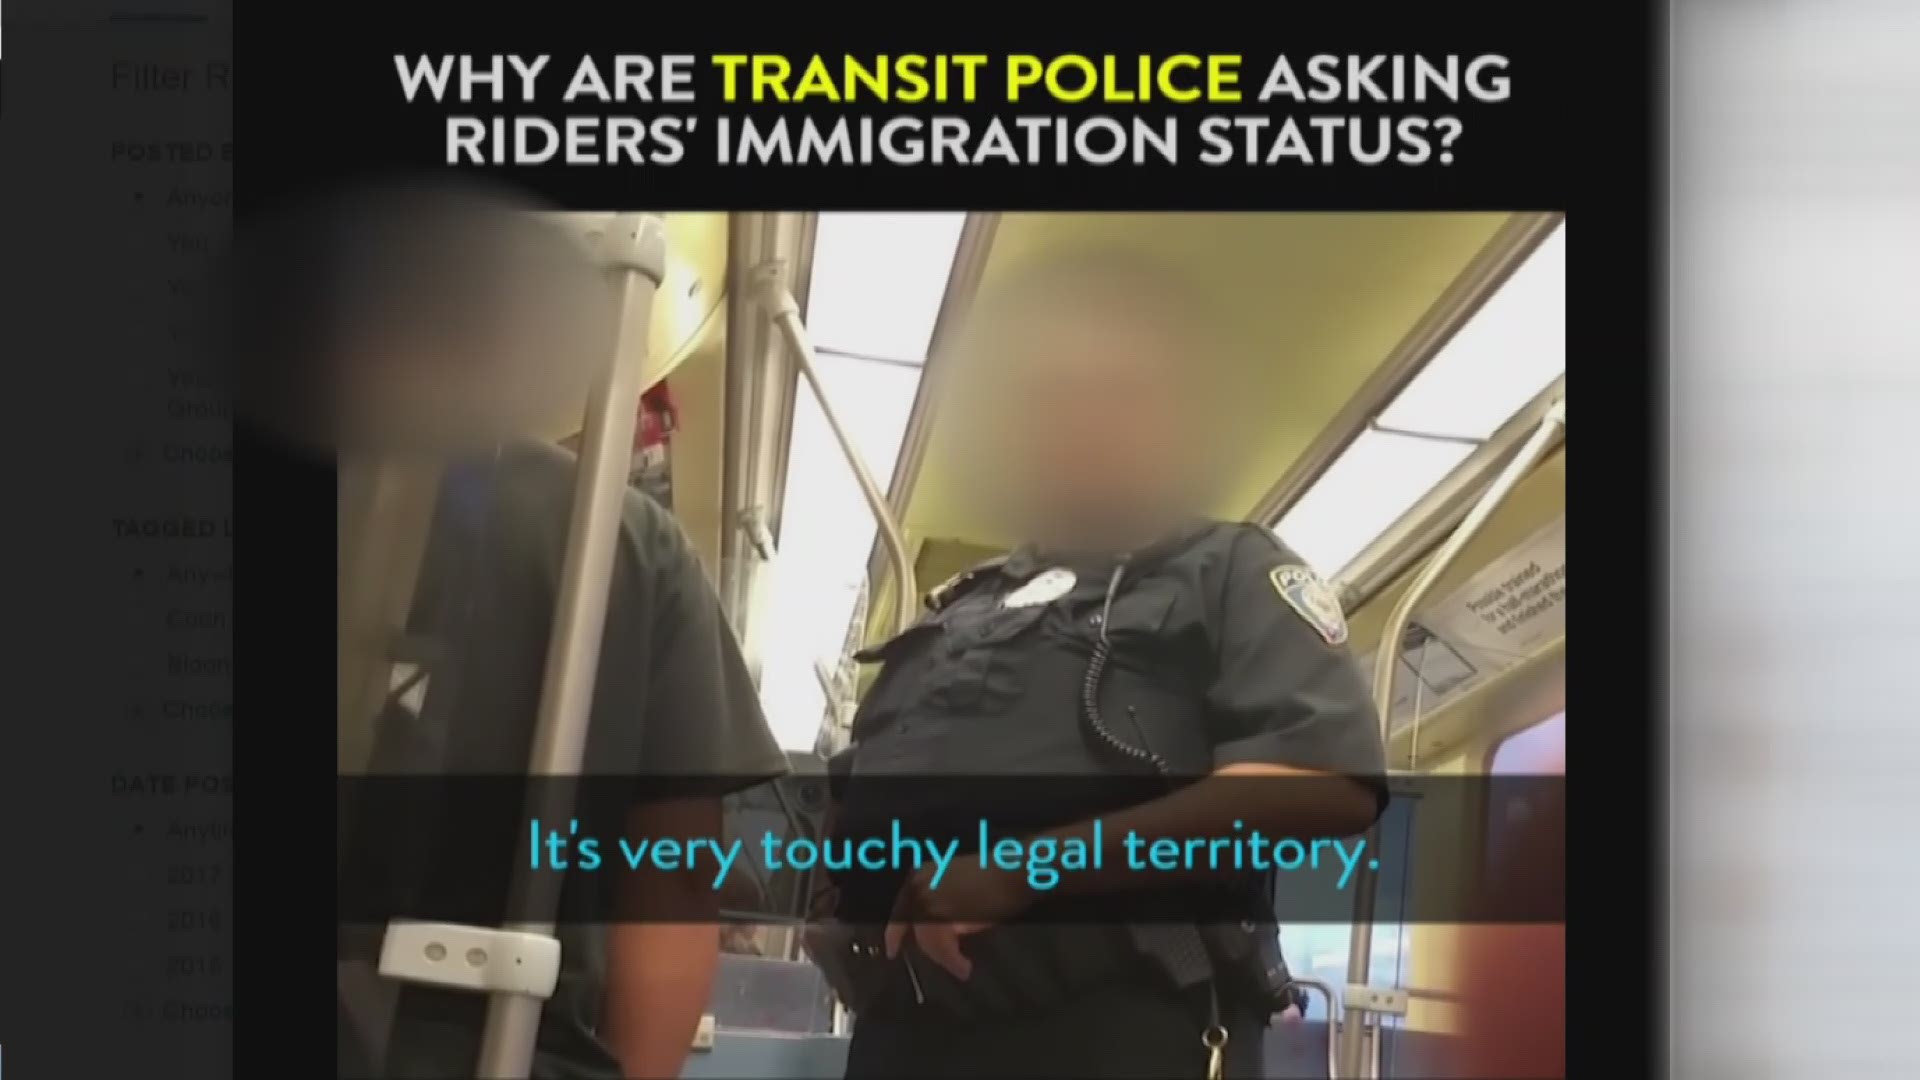 Cell phone video captures officer asking light rail passenger about immigration status